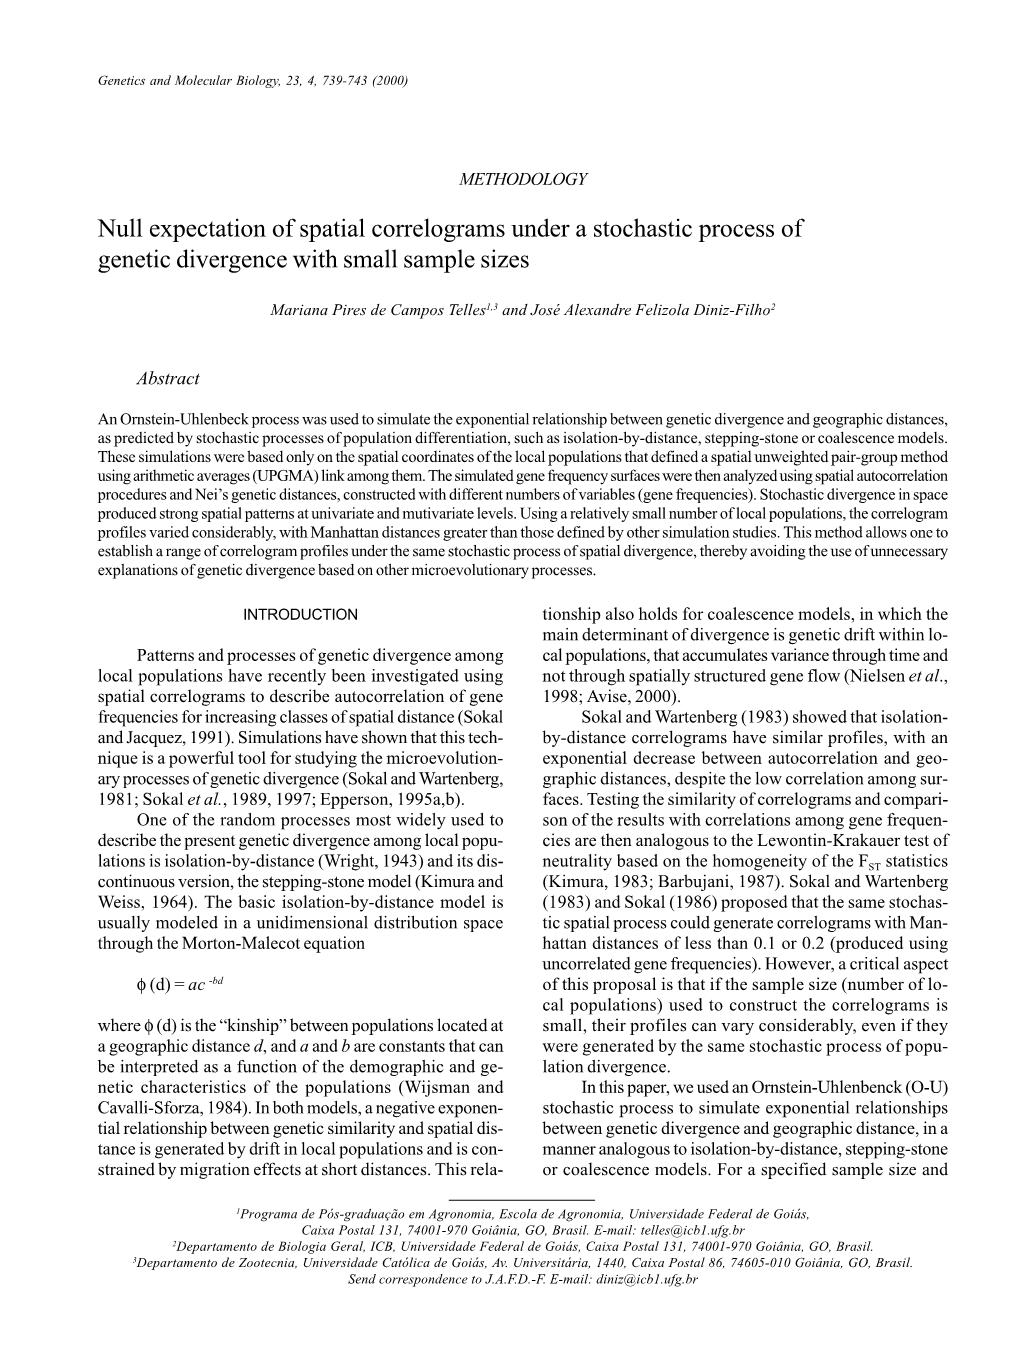 Null Expectation of Spatial Correlograms Under a Stochastic Process of Genetic Divergence with Small Sample Sizes